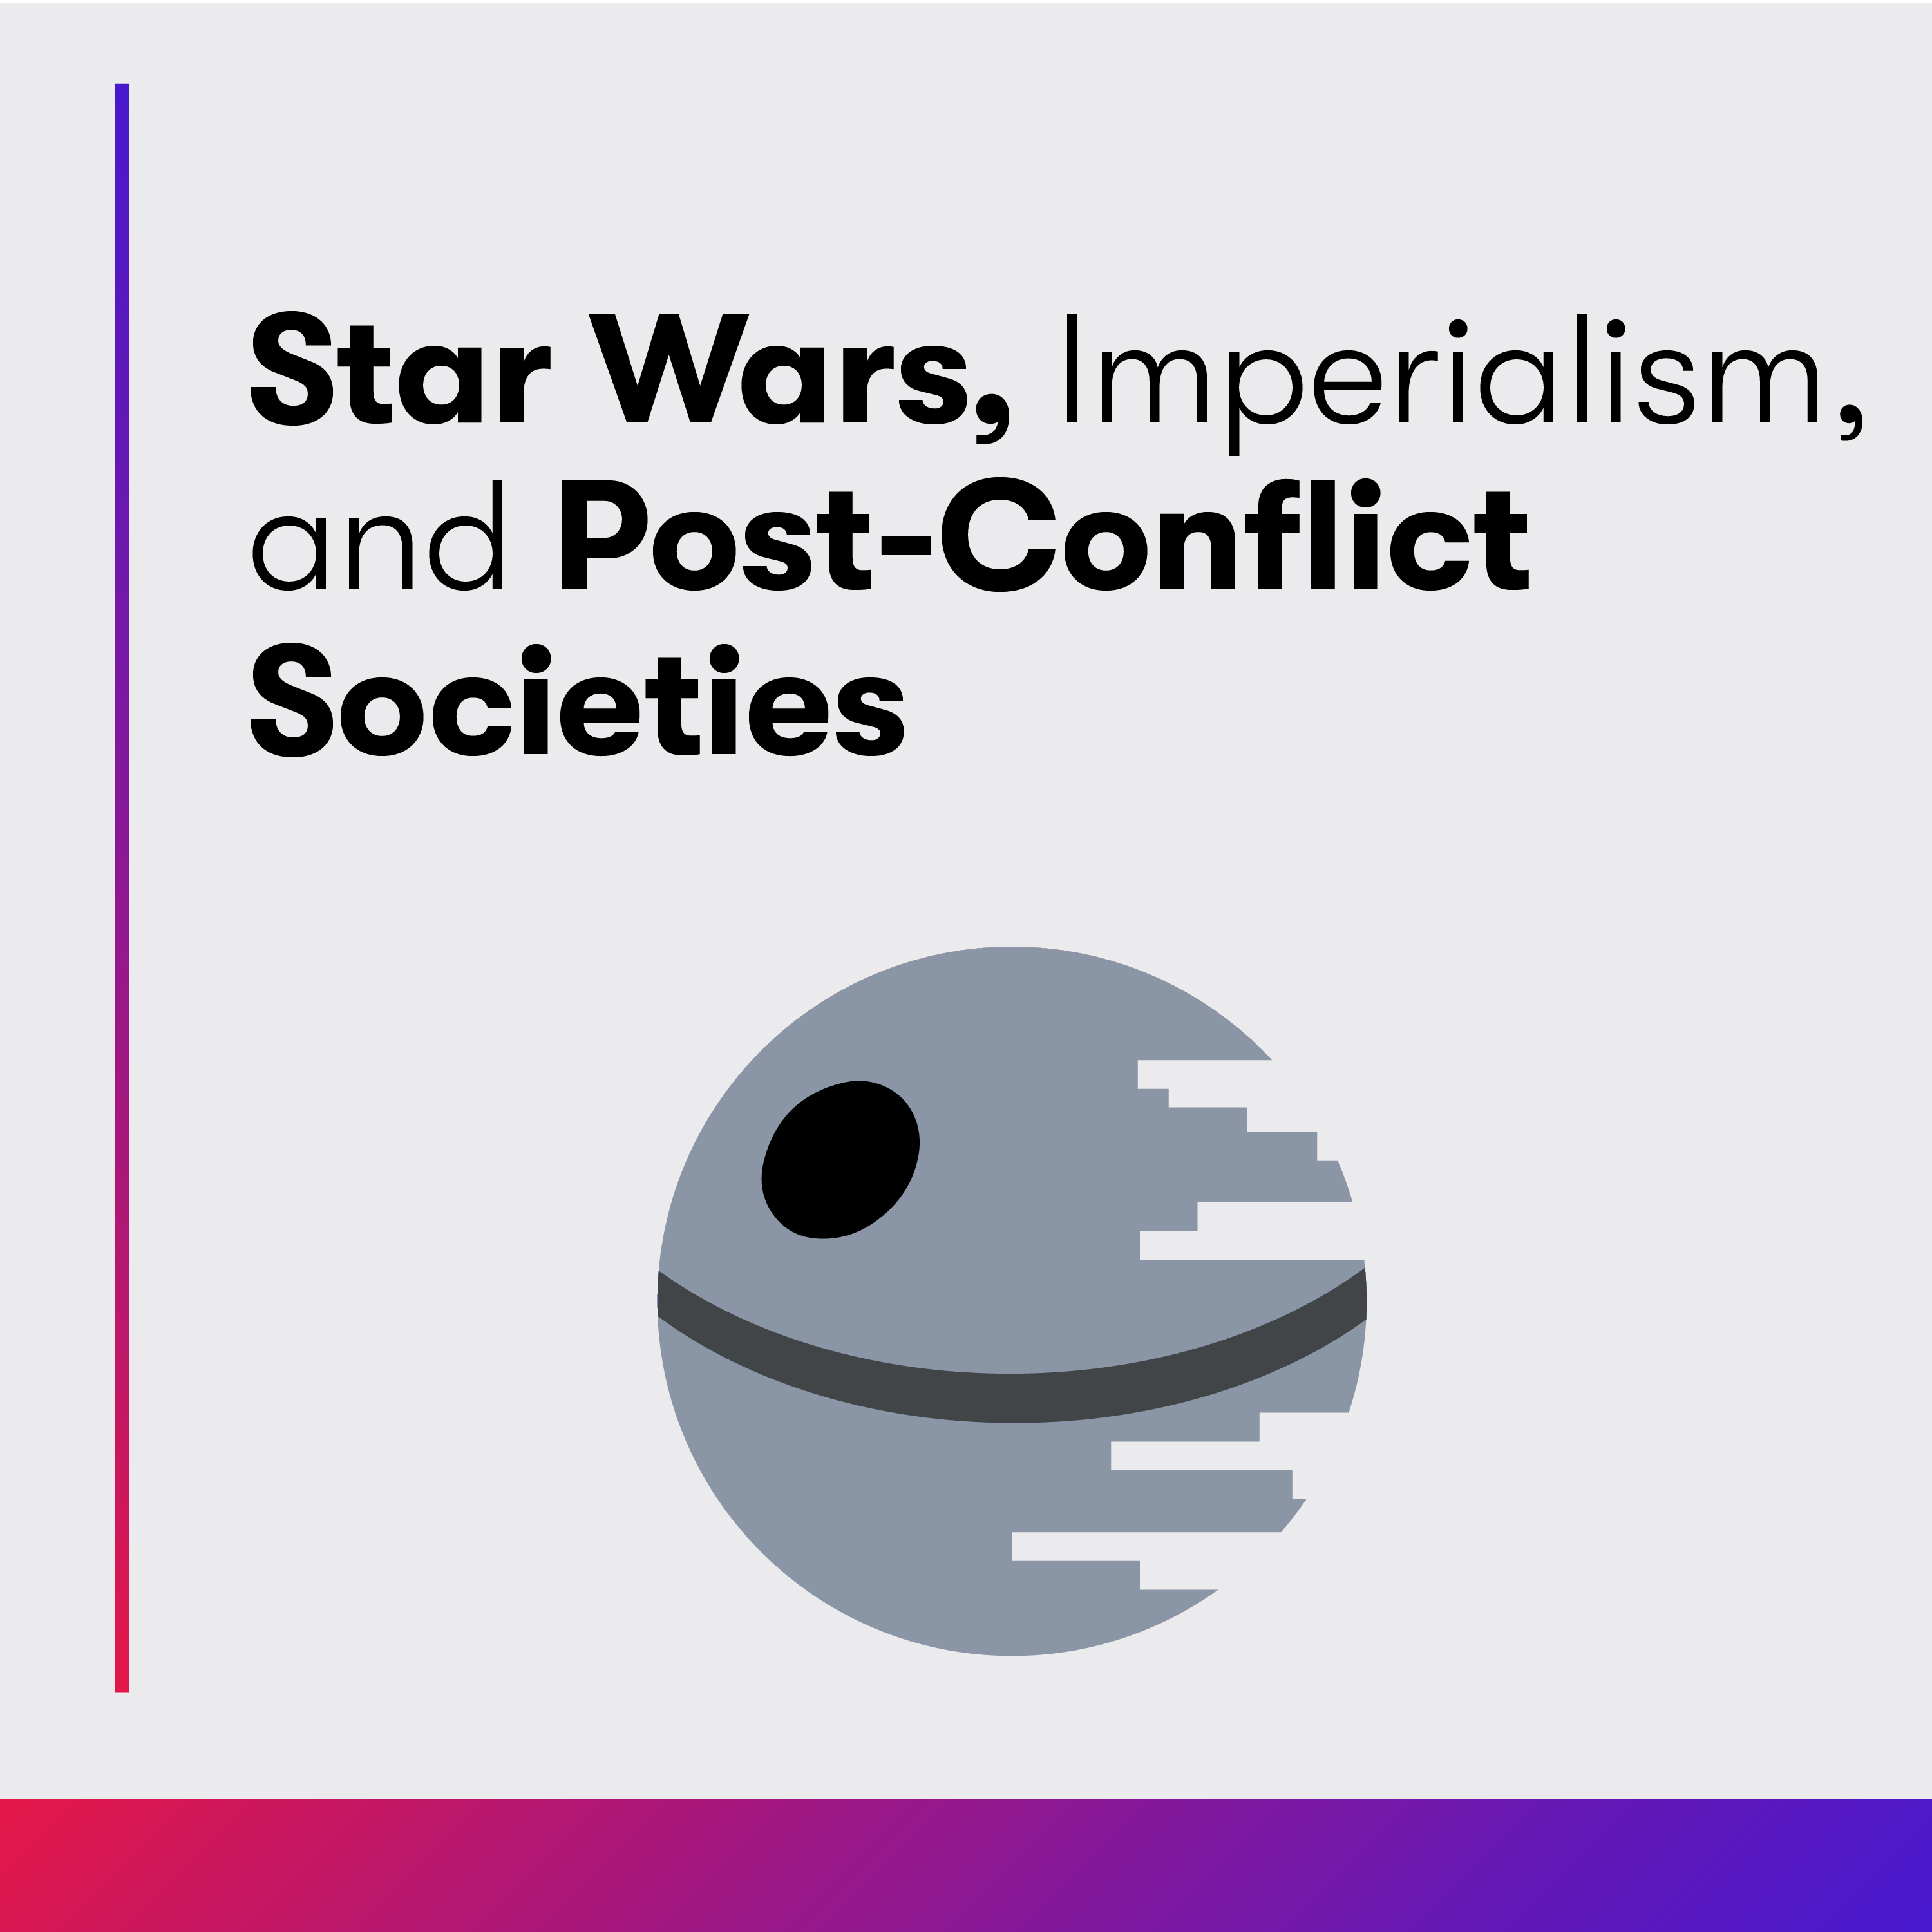 Star Wars, Imperialism, and Post-Conflict Societies